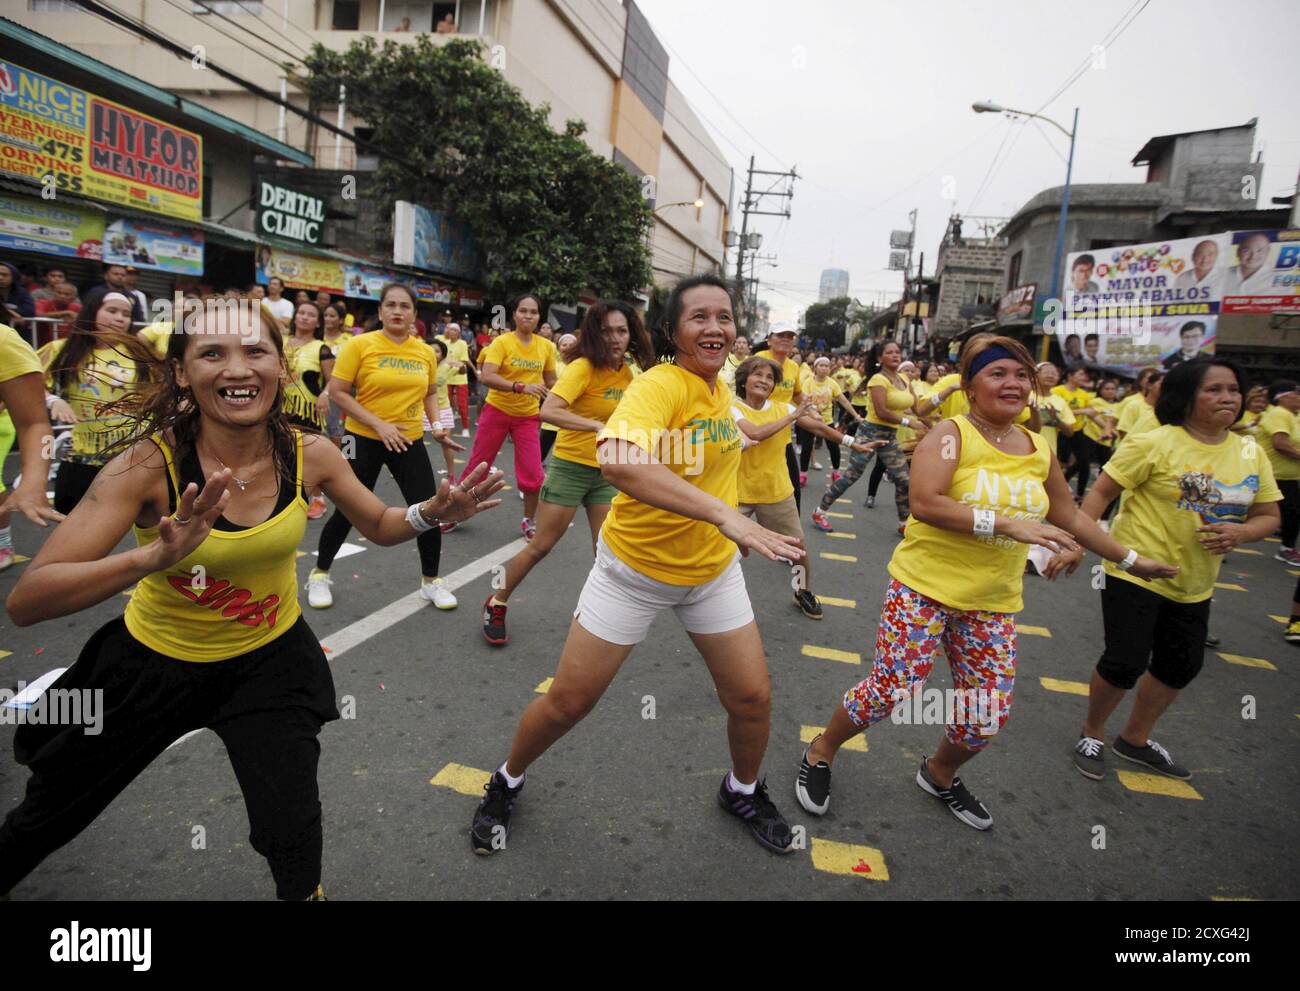 Health enthusiasts dance to high tempo music as they  participate in a Guinness World Records attempt for the largest Zumba class held along the main streets of Mandaluyong city, metro Manila, July 19, 2015. Mandaluyong city achieved the Guinness World Records for the largest Zumba class with an official tally of 12,975 people simultaneously doing Zumba, overthrowing Cebu City's record of 8,232 people held in October 2014, a Guinness World Records official said.      REUTERS/Lorgina Minguito Stock Photo